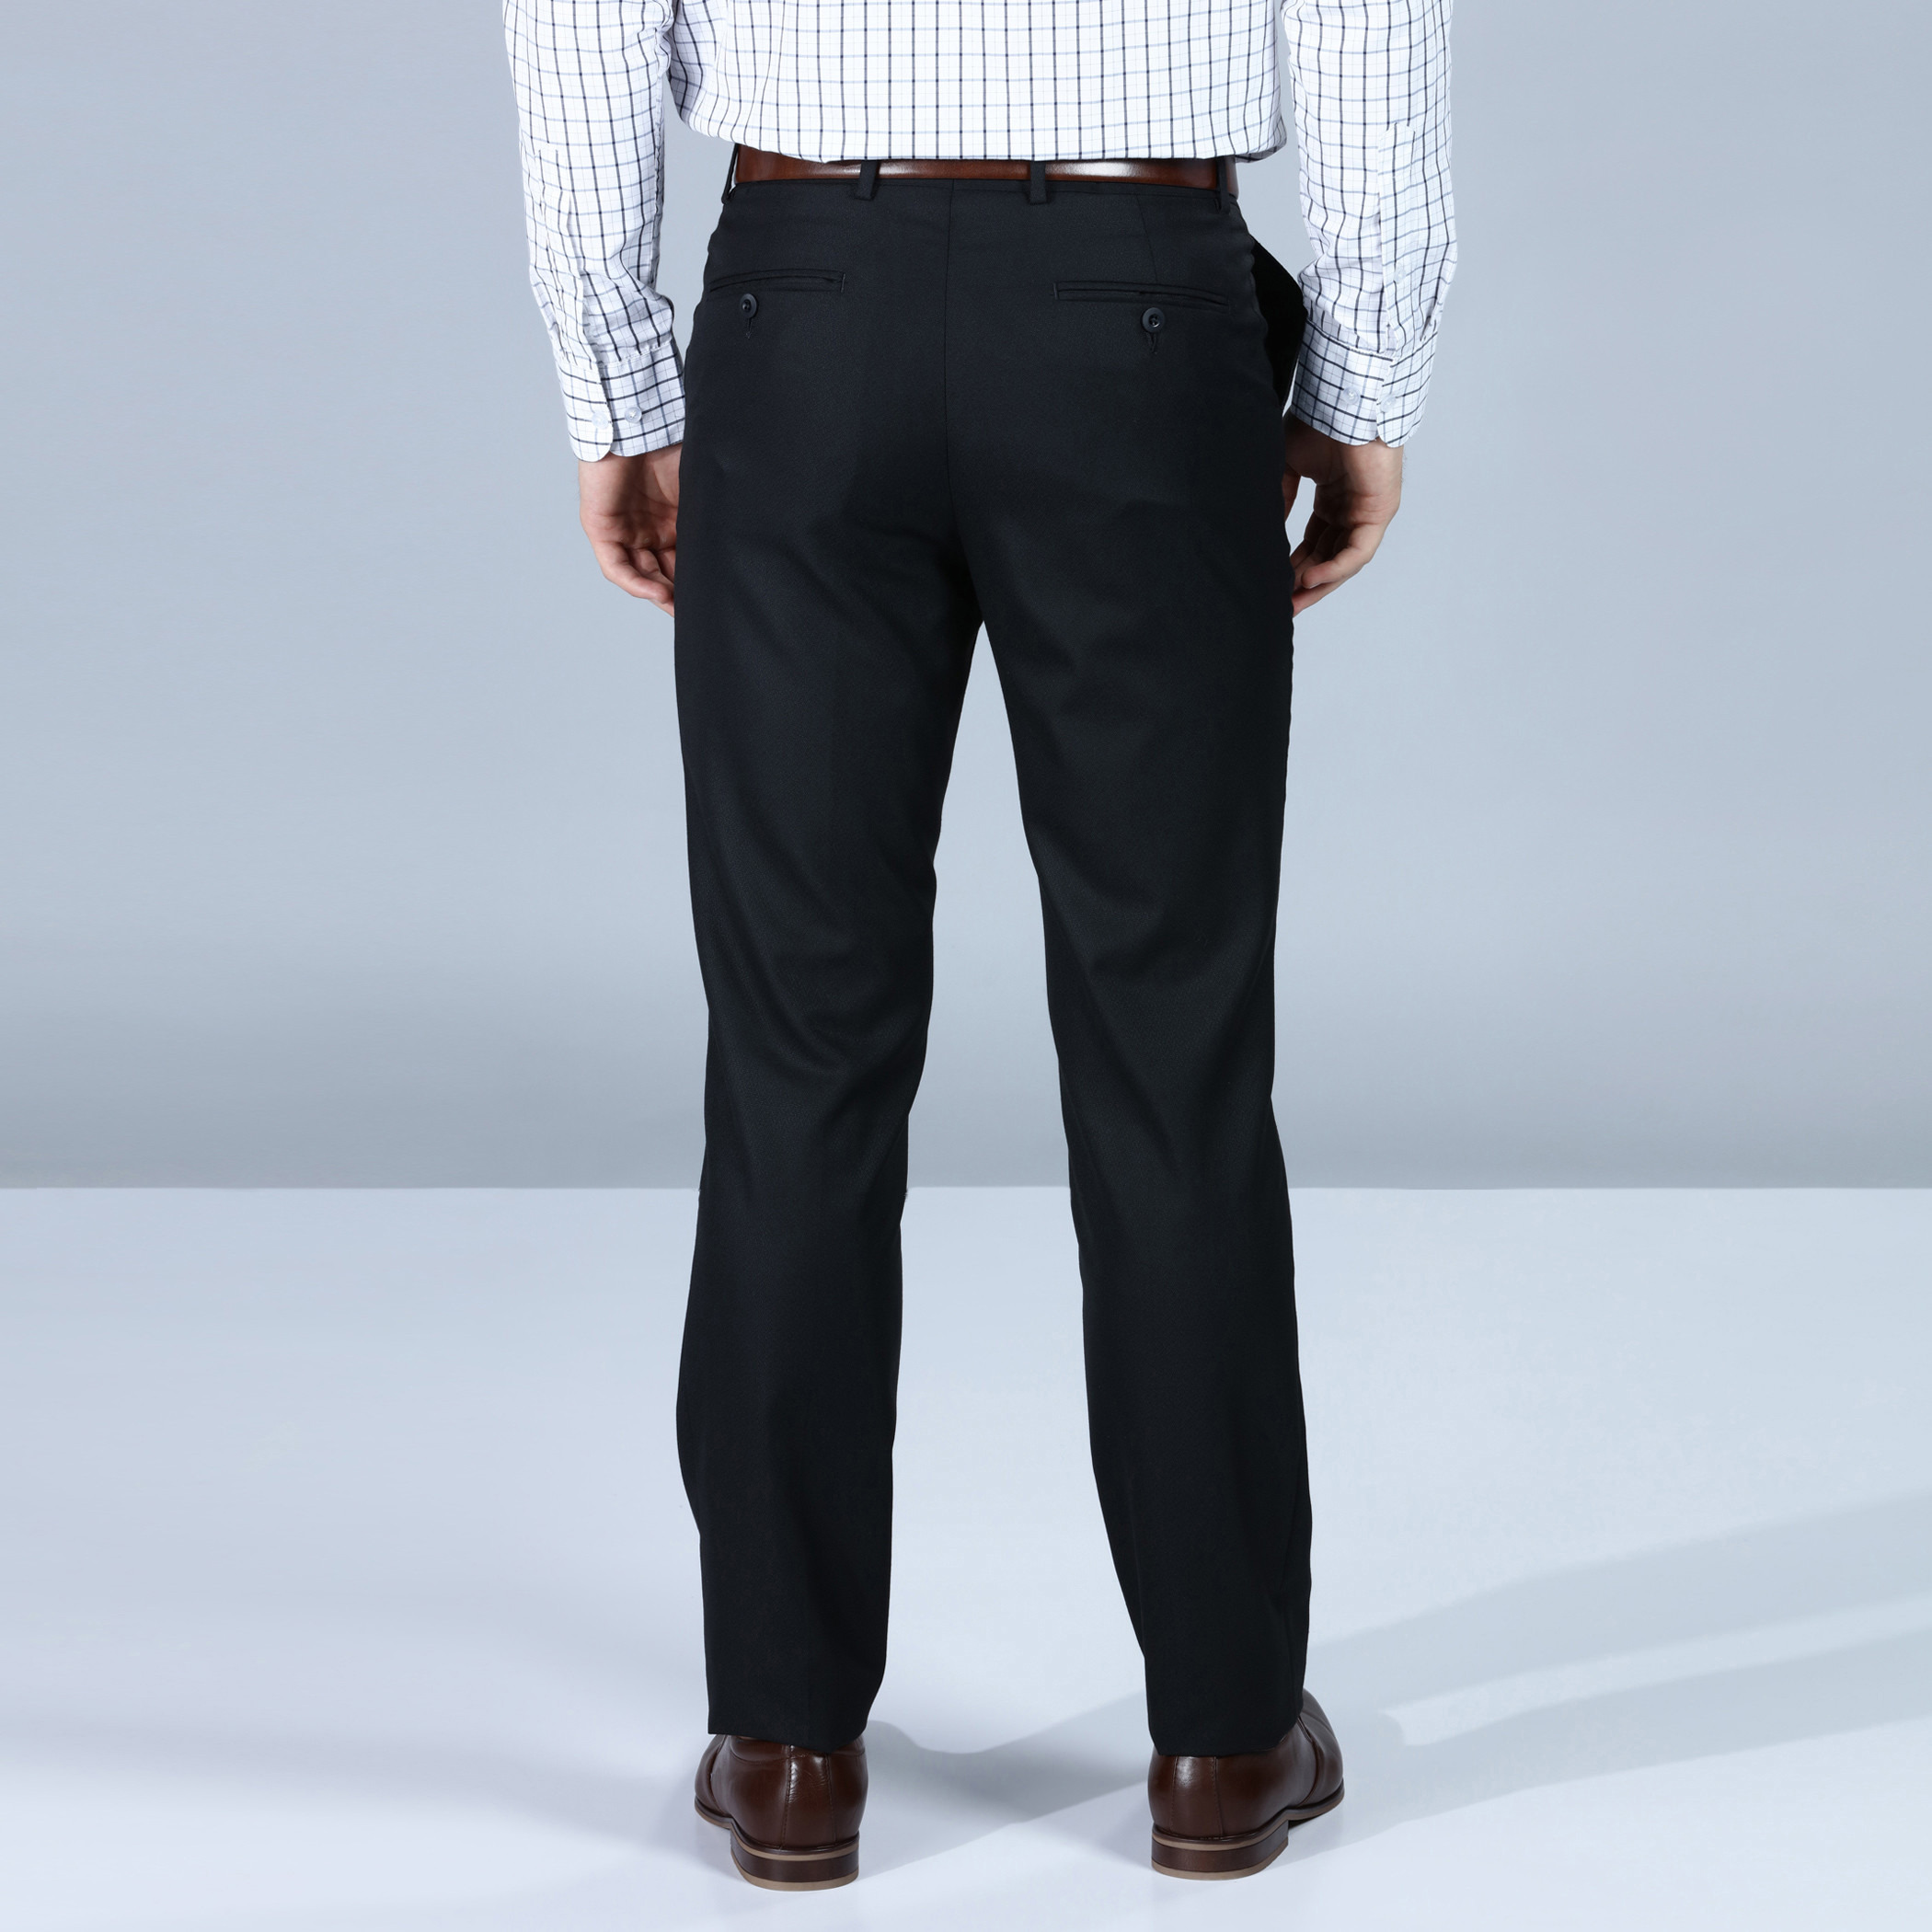 Max Collection Formal Trousers & Hight Waist Pants for Men sale -  discounted price | FASHIOLA INDIA